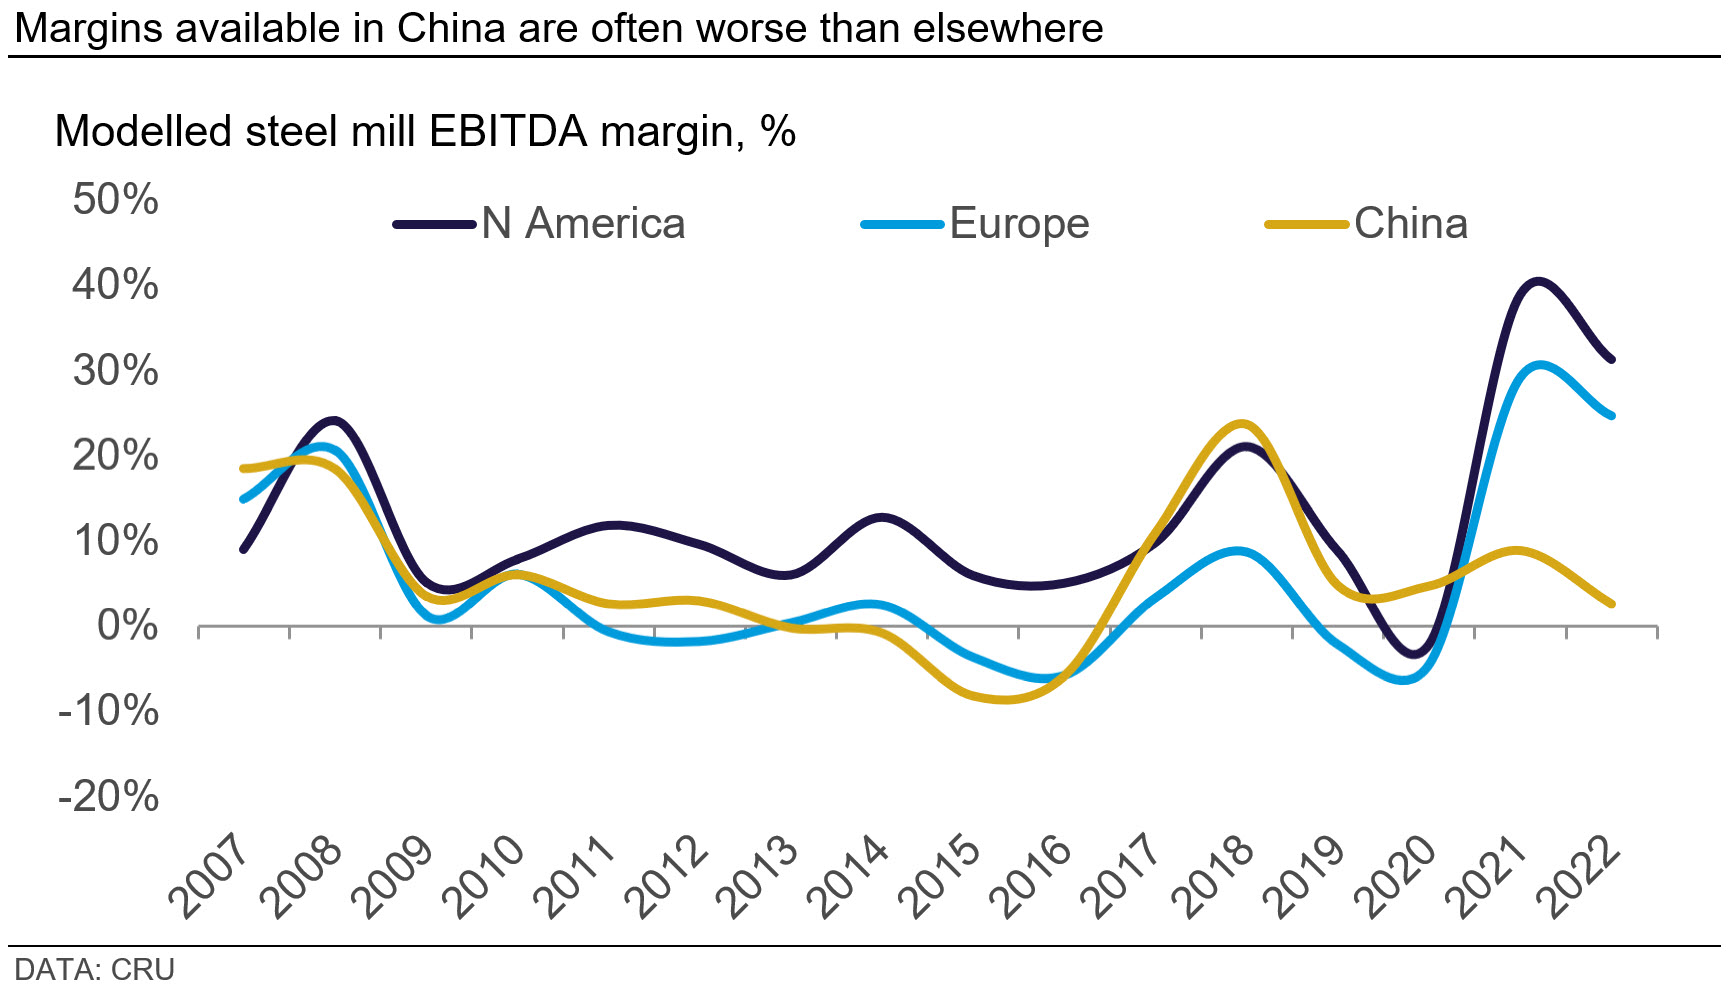 Graph showing that margins available in China are often worse than elsewhere